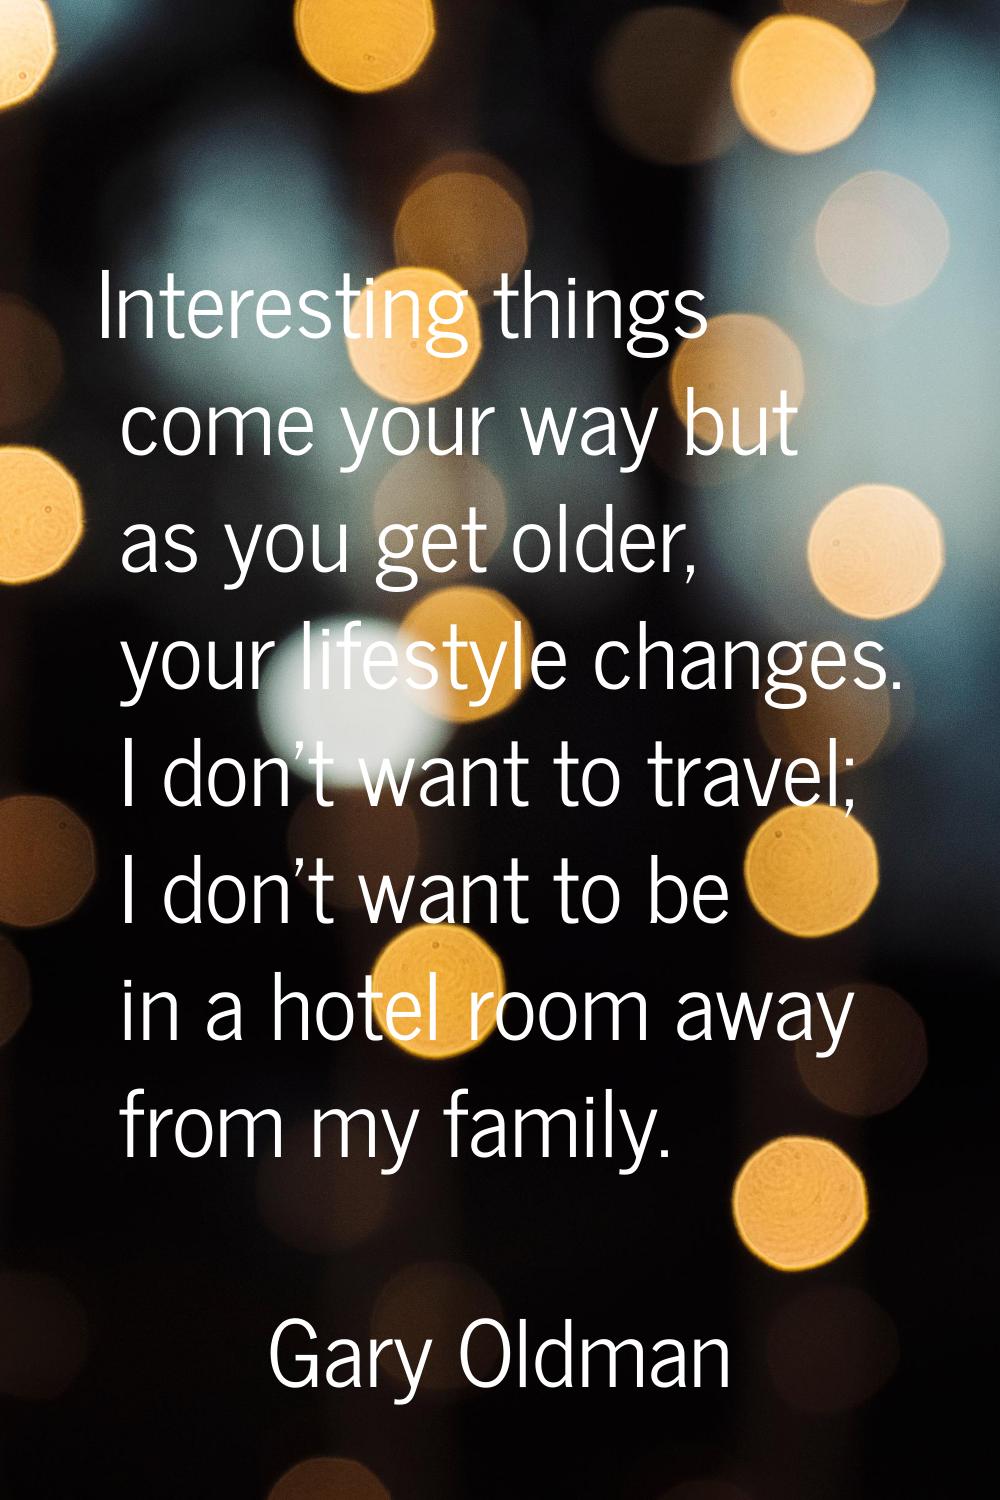 Interesting things come your way but as you get older, your lifestyle changes. I don't want to trav